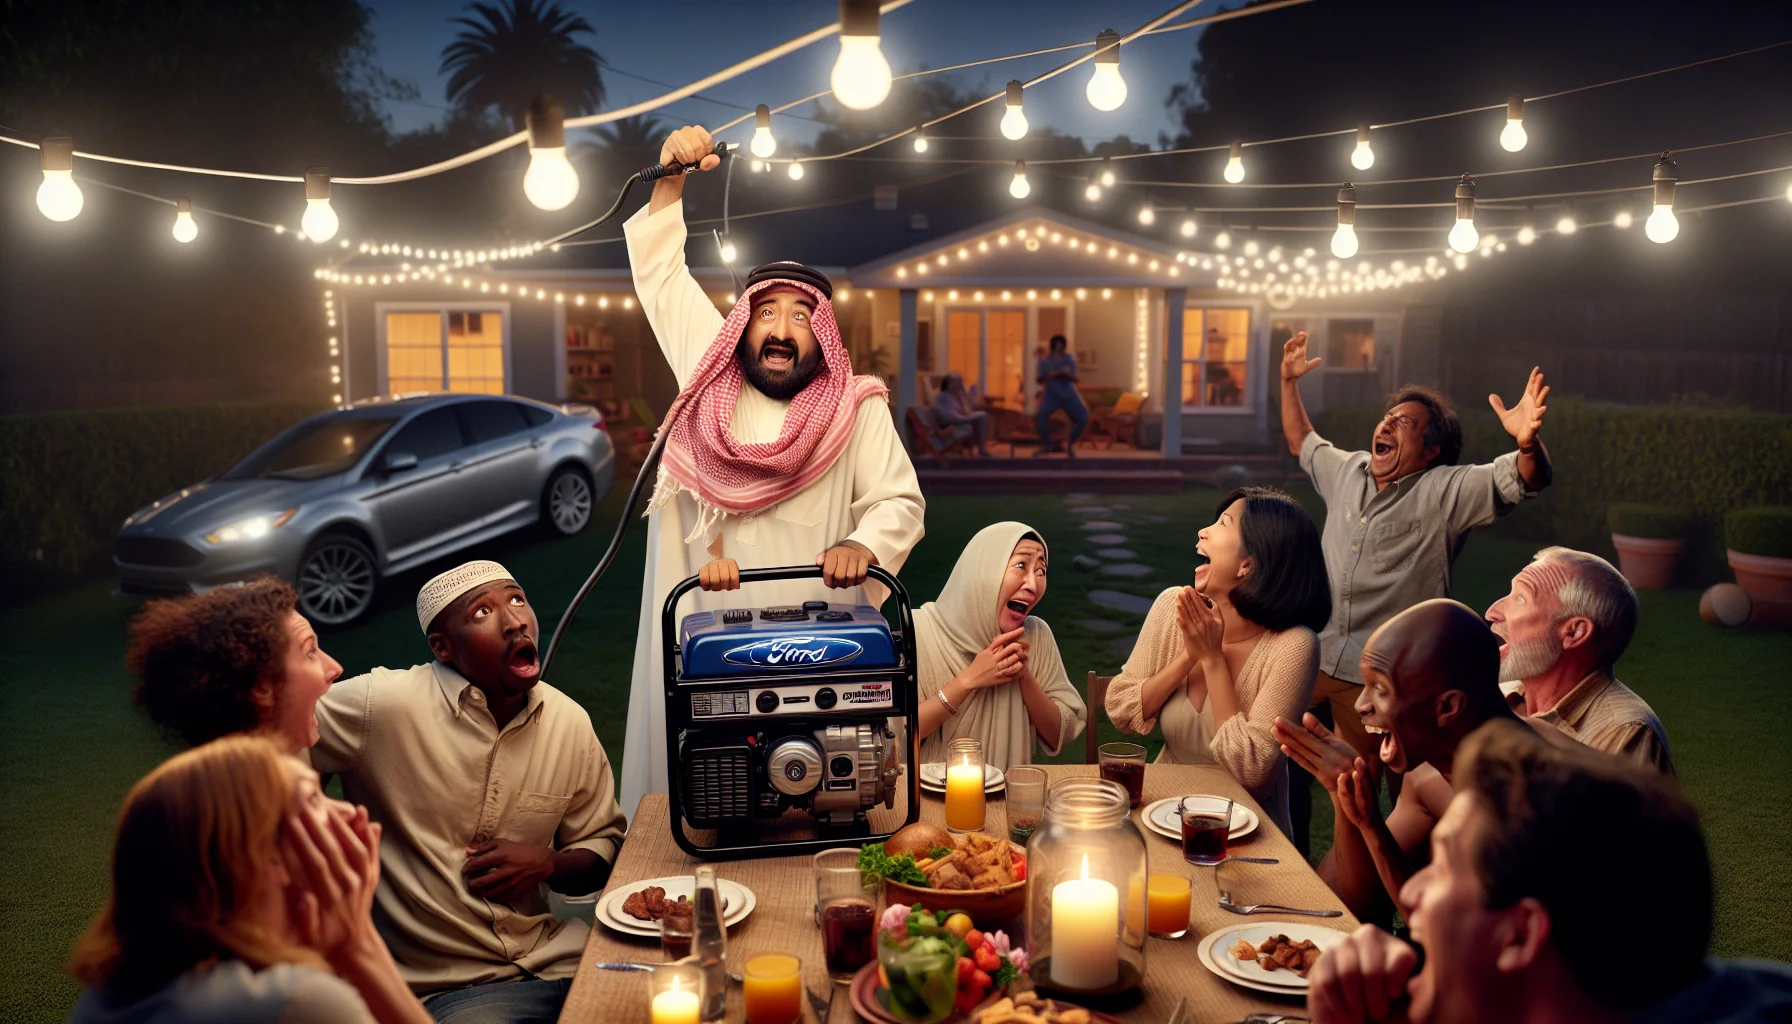 Create a humorous, realistic scene involving a power outage at an outdoor night-time dinner party. The party attendees look shocked and slightly disappointed. Suddenly, in the midst of confusion, a Middle-Eastern man steps forward, light glowing on his face in anticipation. He triumphantly lifts a Ford generator over his head, plugging it in, and instantly everything alights back up. The guests, including a South Asian woman and a Black man, are visibly relieved and cheer in unison, laughing at the absurdity of the situation. Everything is decorated with a clear nod to the brand Ford without explicit logos.